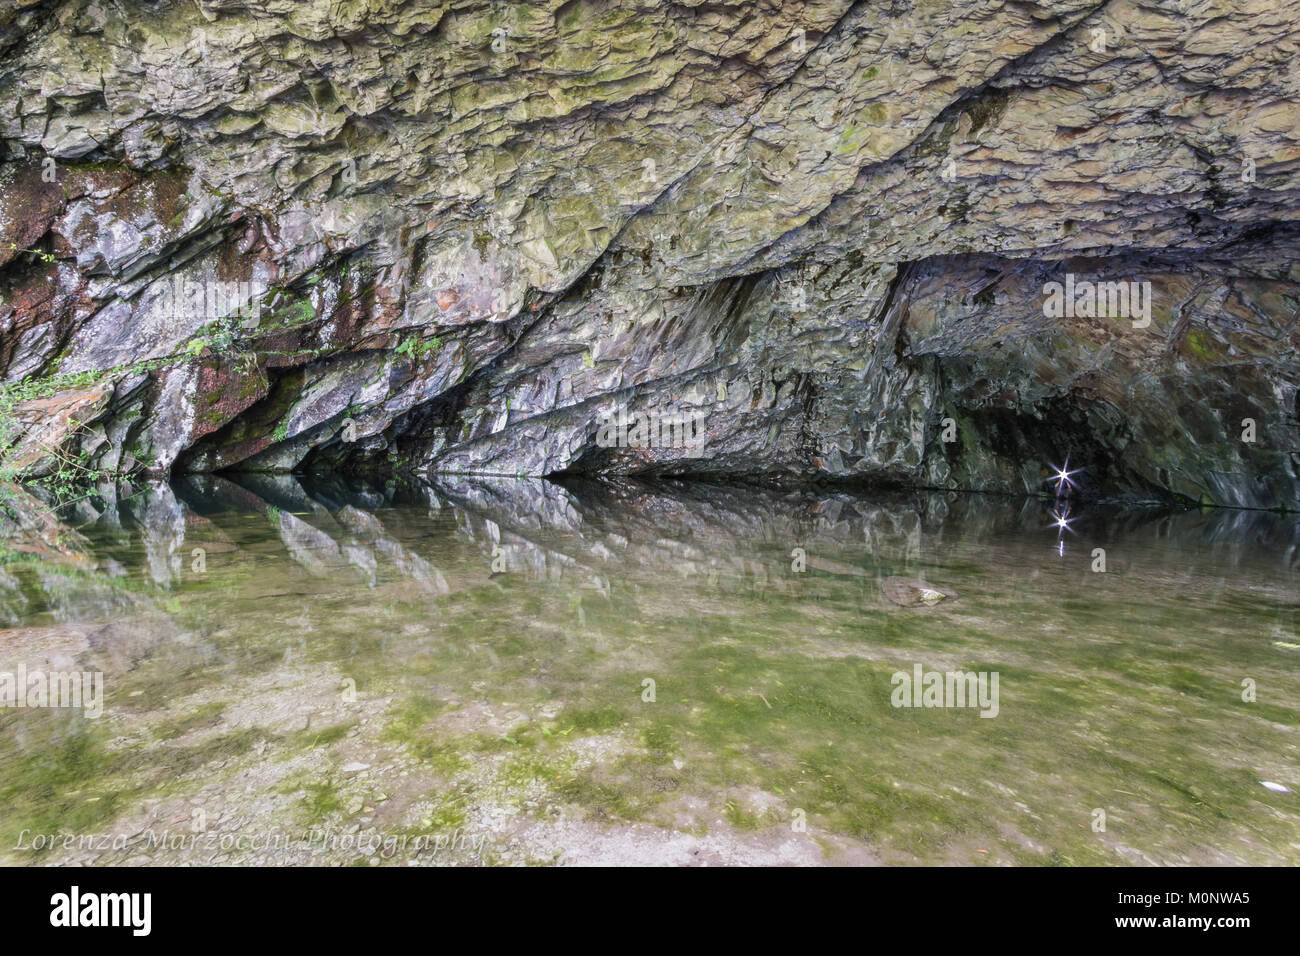 Inside Rydal cave in the Lake District, UK with a reflection of the cave walls in the water. Stock Photo